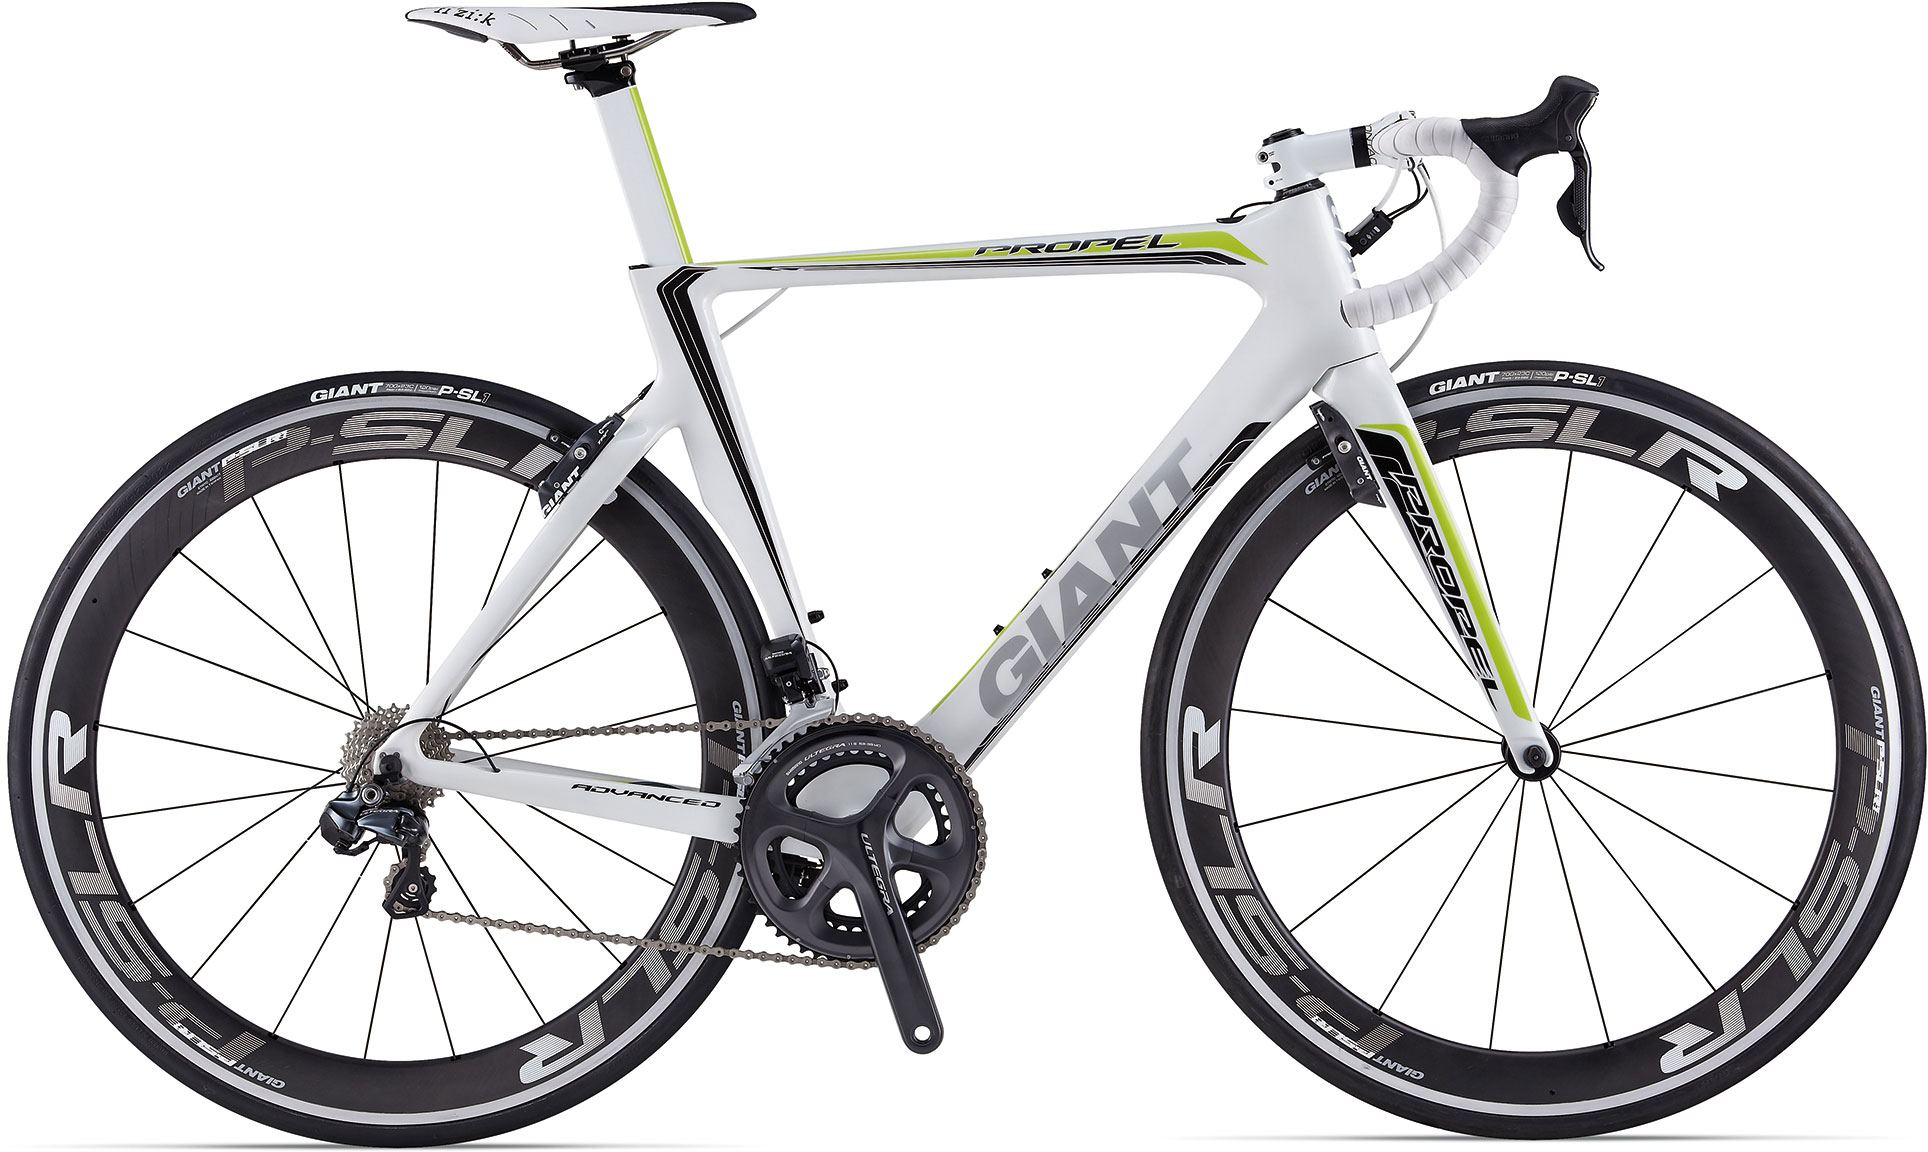 Giant Defy Advanced 1 14 Buy Clothes Shoes Online